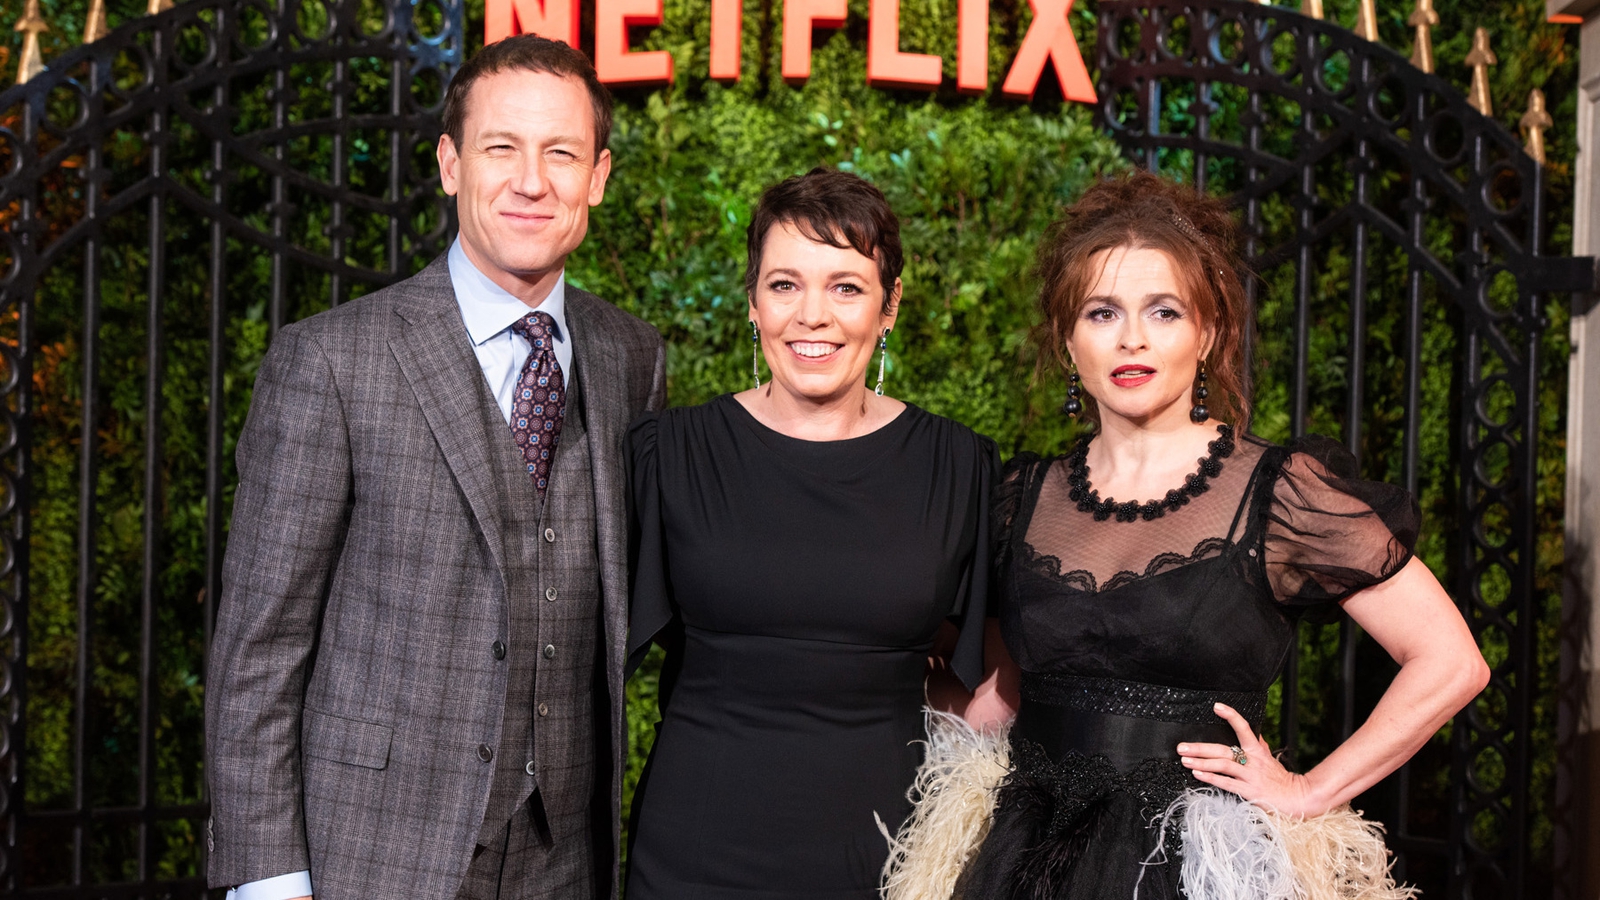 The Crown cast hit the red carpet for premiere